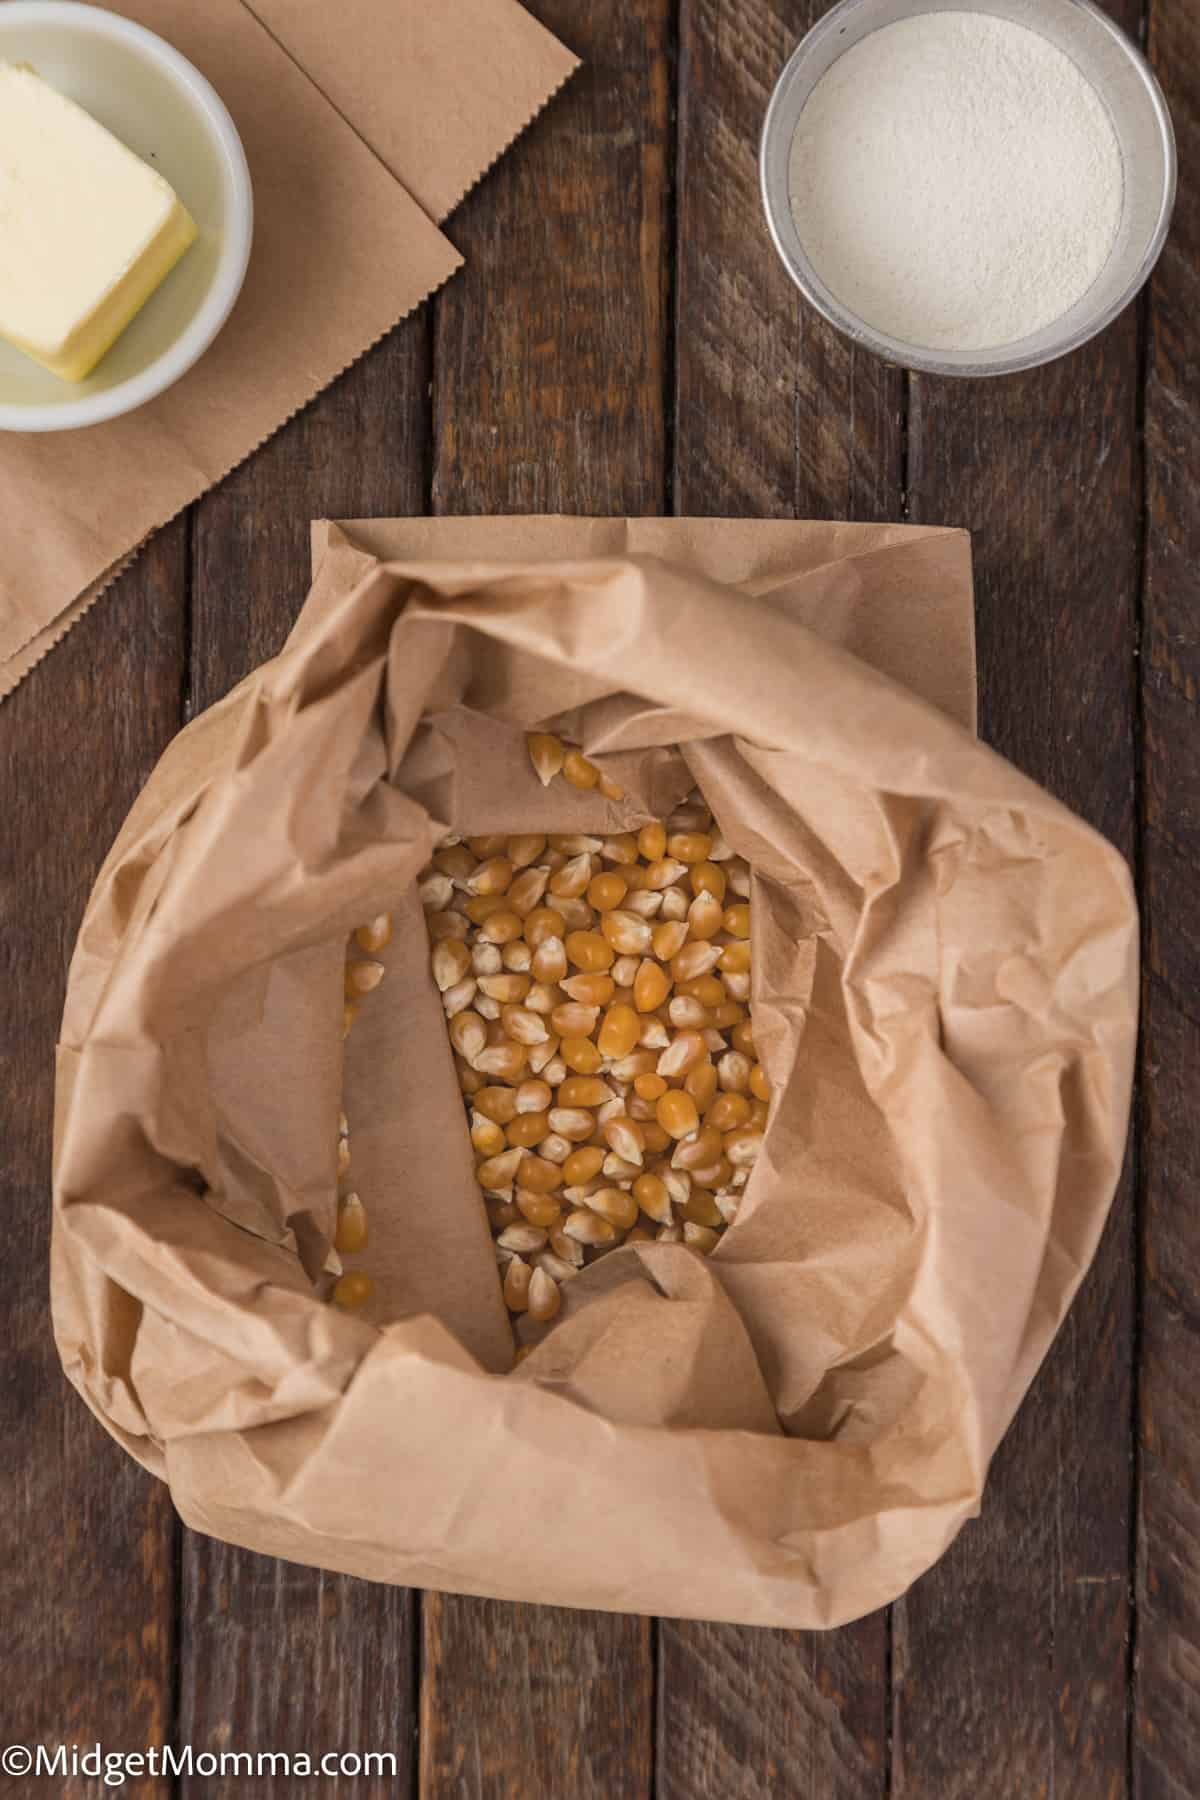 A brown paper bag of popcorn kernels on a wooden table.